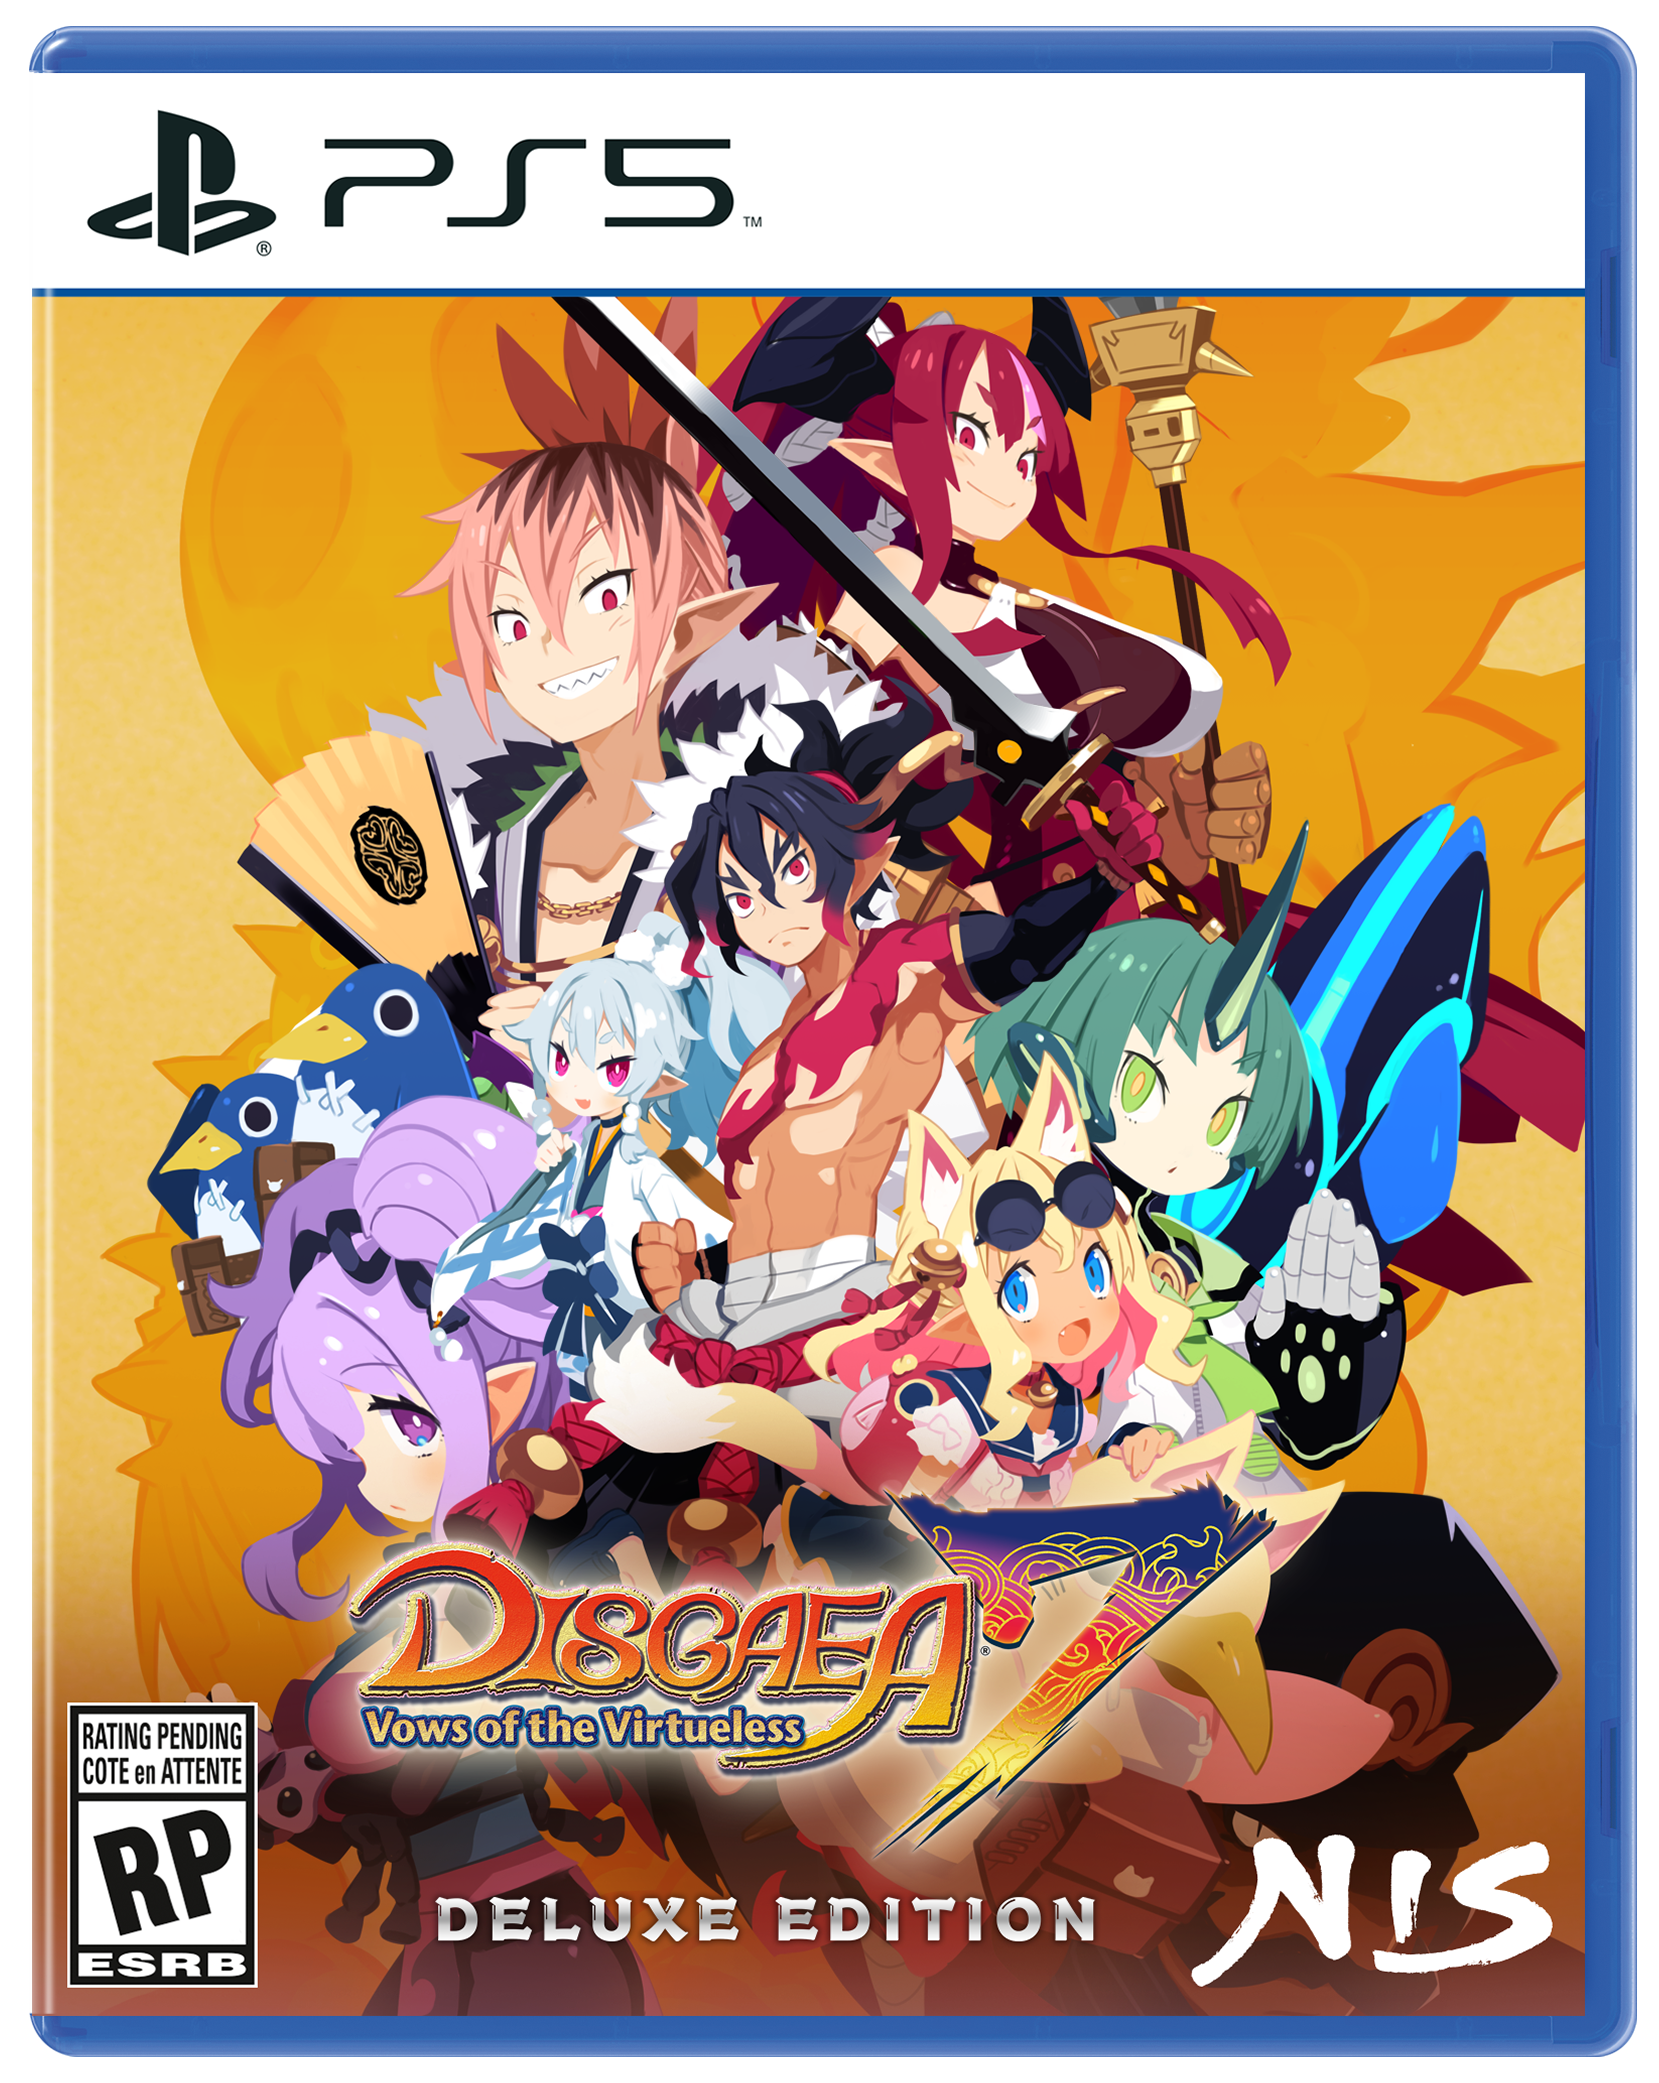 Disgaea 7: Vows of the Virtueless - Deluxe Edition - PlayStation 5